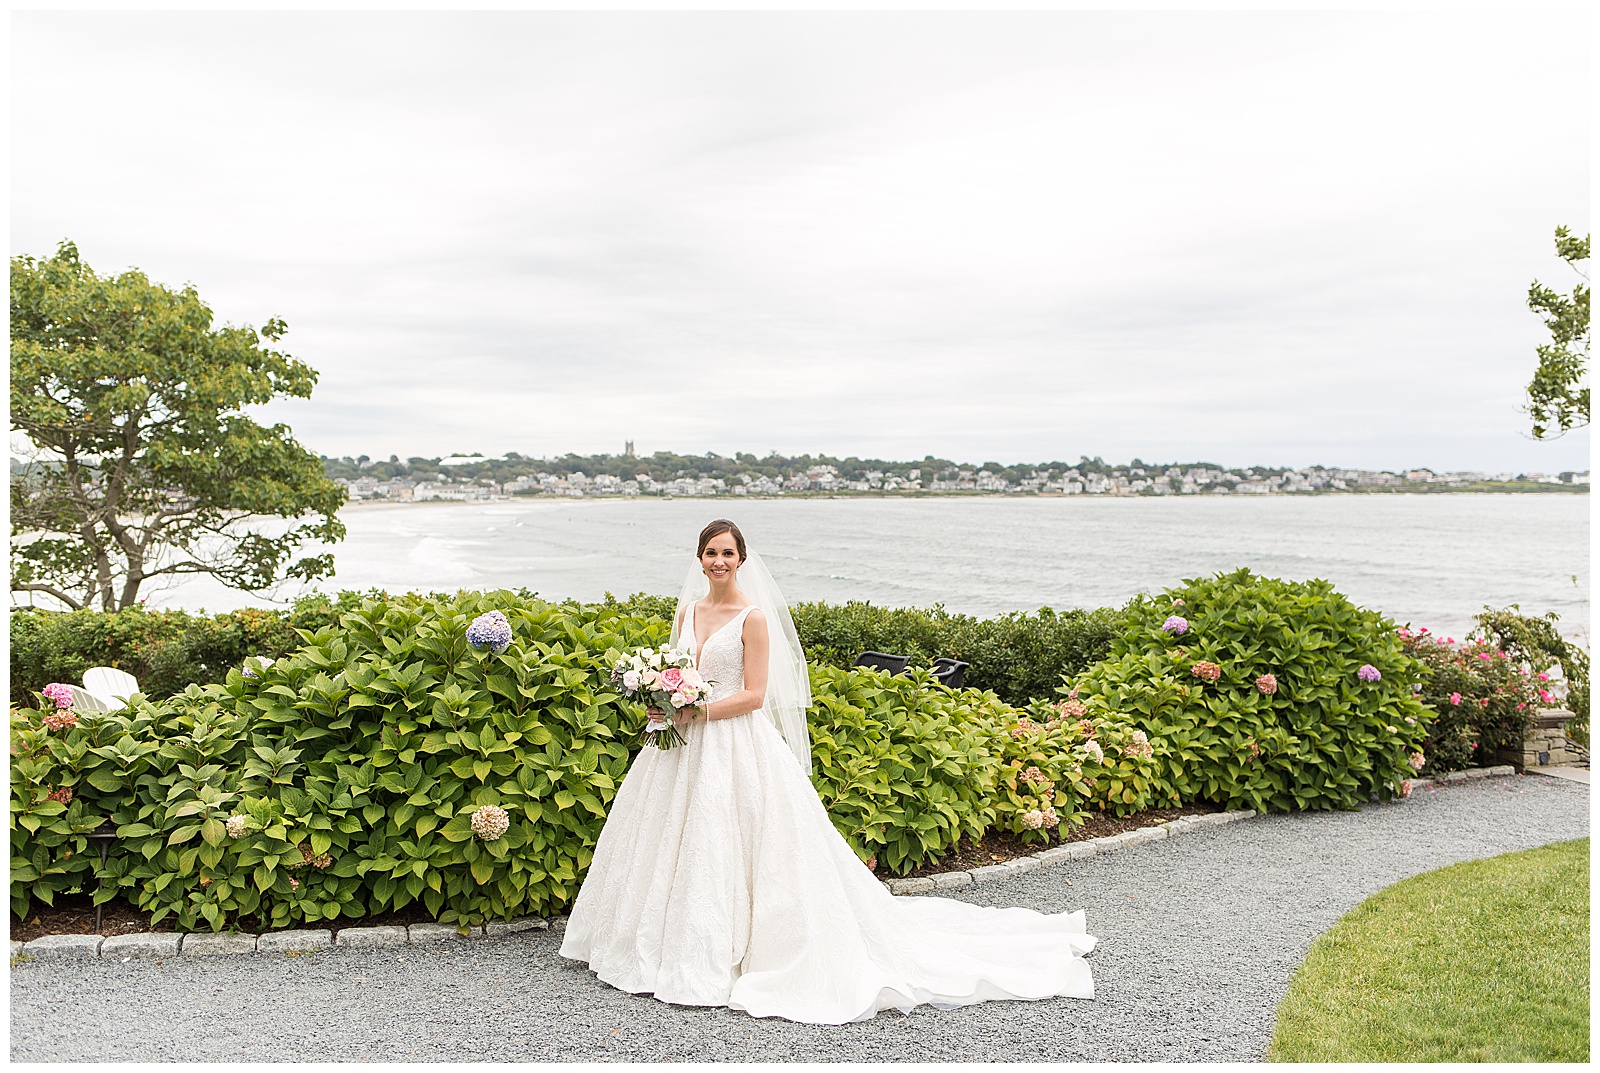 Bride poses by the ocean at the Chanler resort